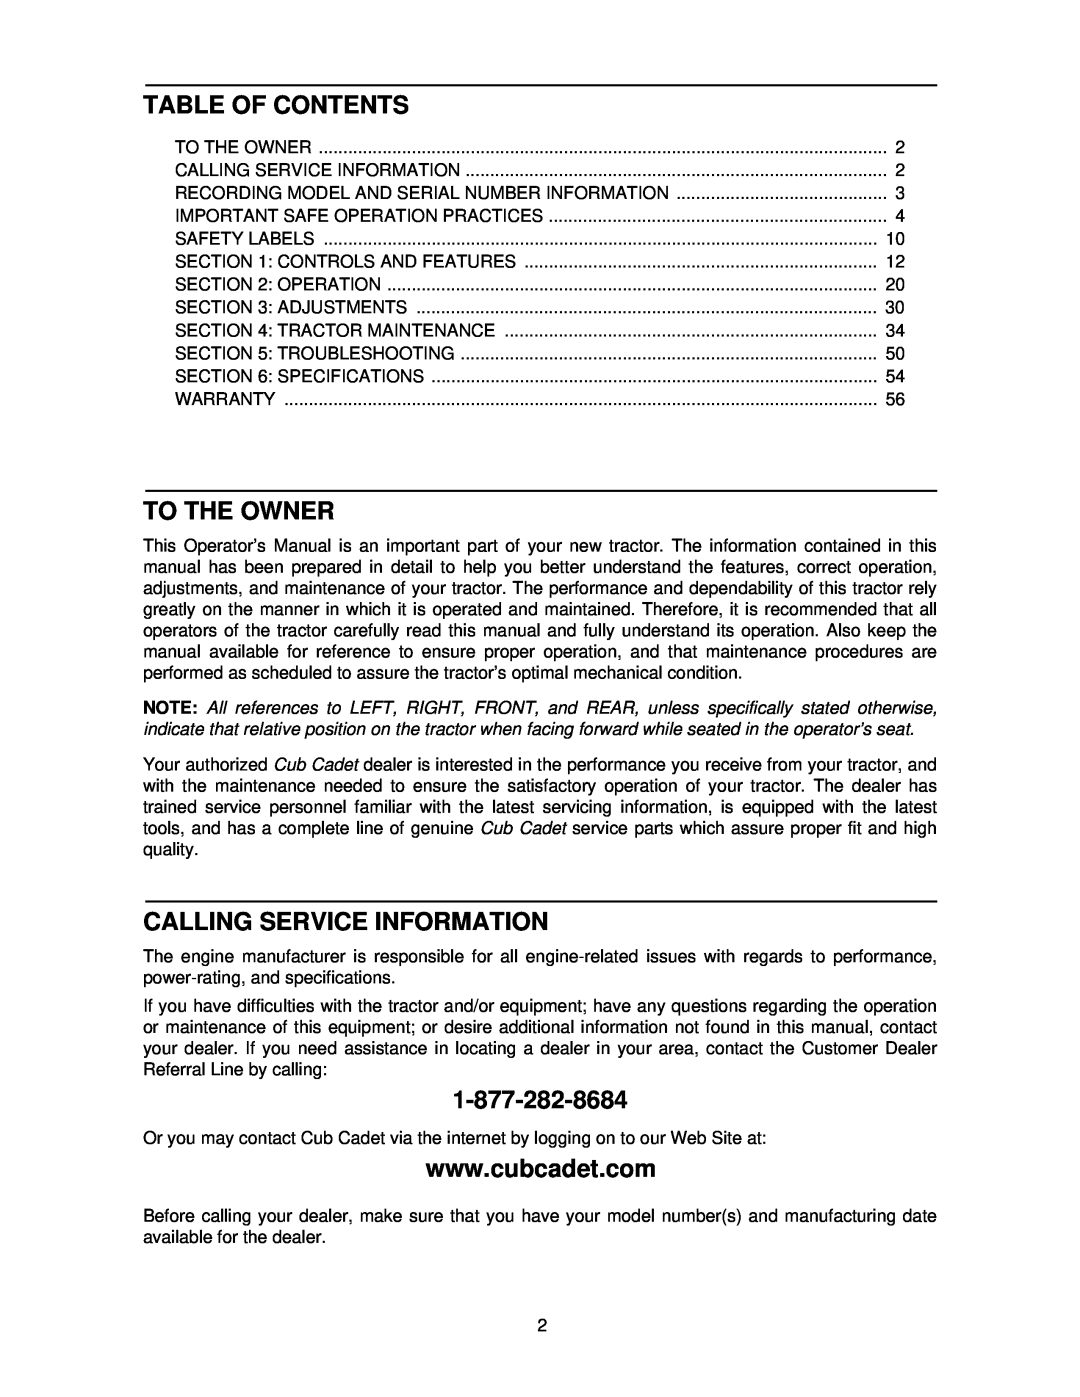 Cub Cadet 8354 manual Table Of Contents, To The Owner, Calling Service Information, 1-877-282-8684 